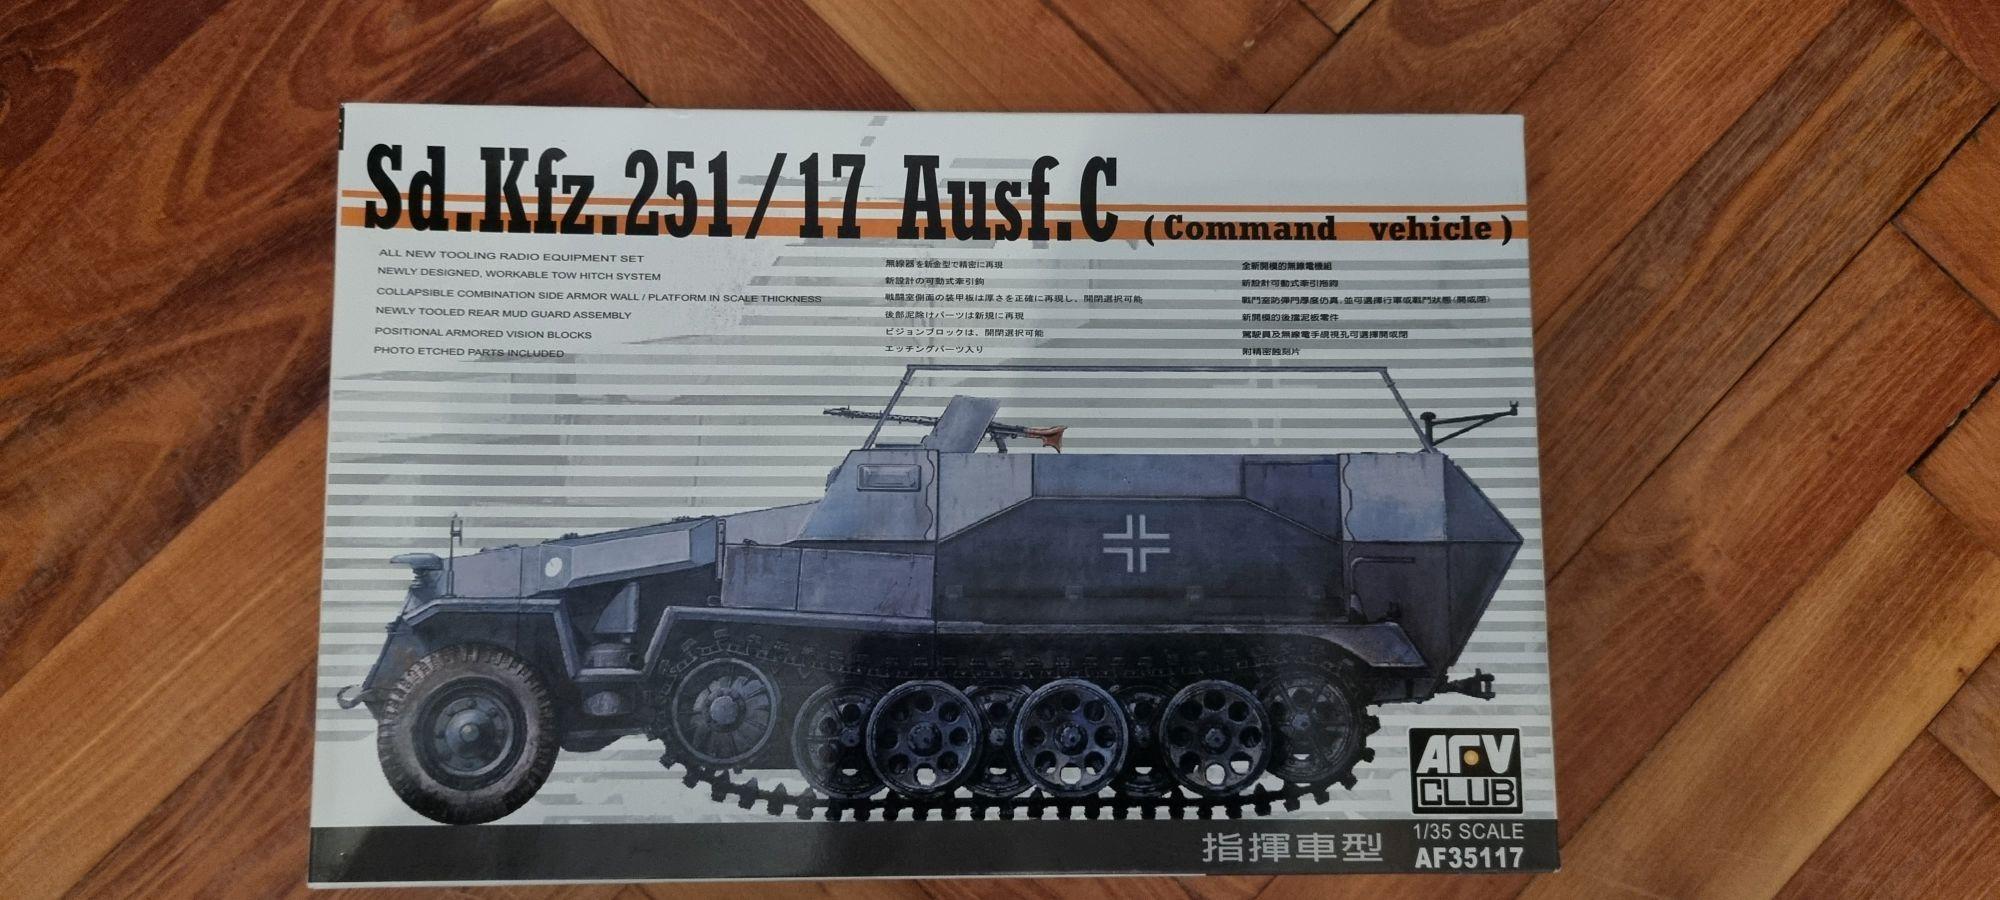 AF35117 1_35 Sd.Kfz. 251_17 Ausf. C (Command vehicle)

AF35117 1_35 Sd.Kfz. 251_17 Ausf. C (Command vehicle)